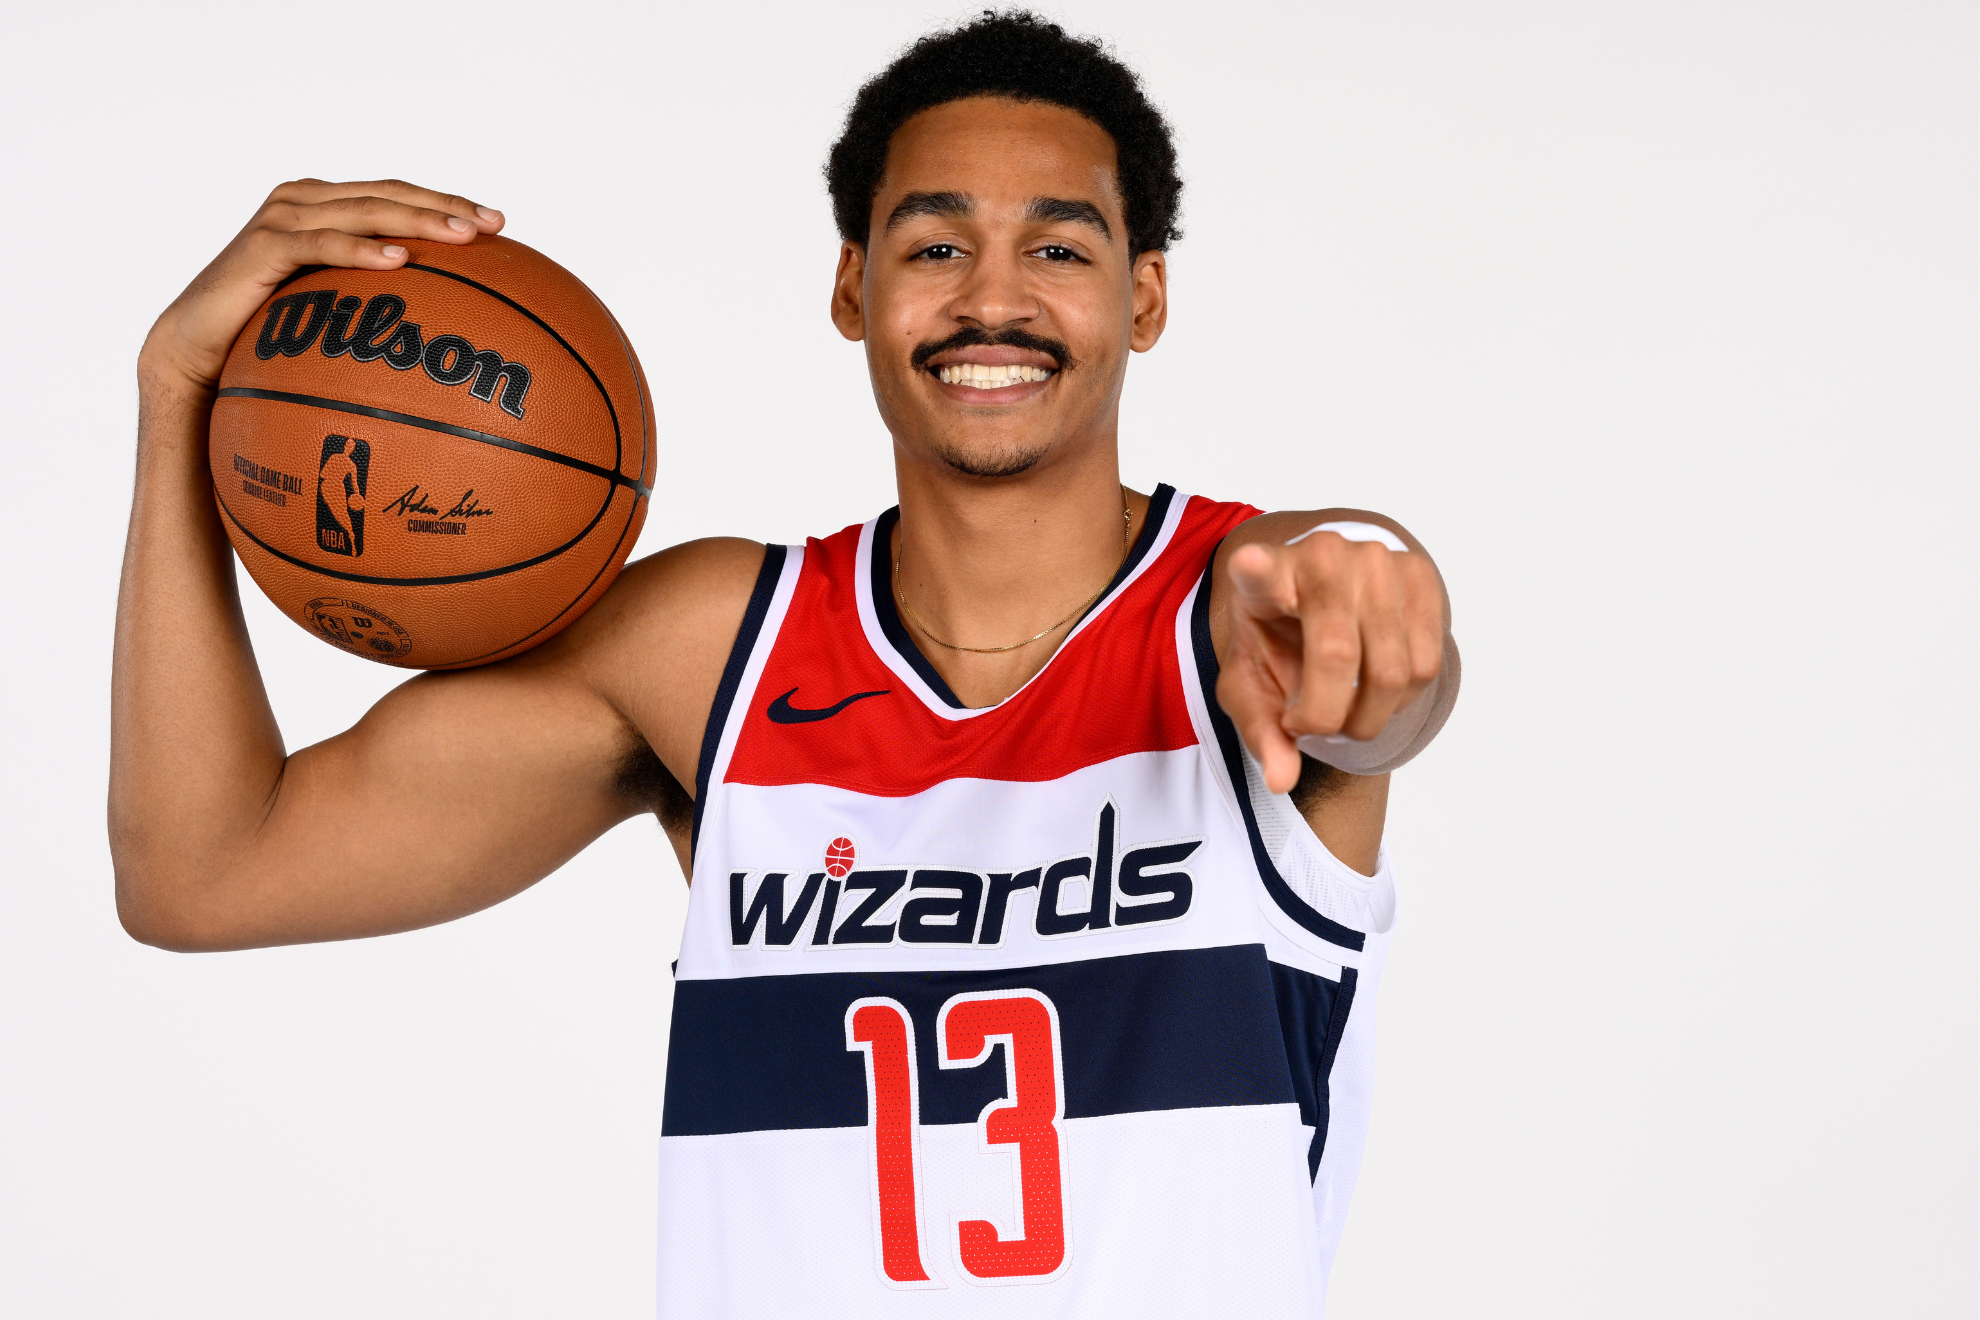 Poole poses at the Wizards' media day.